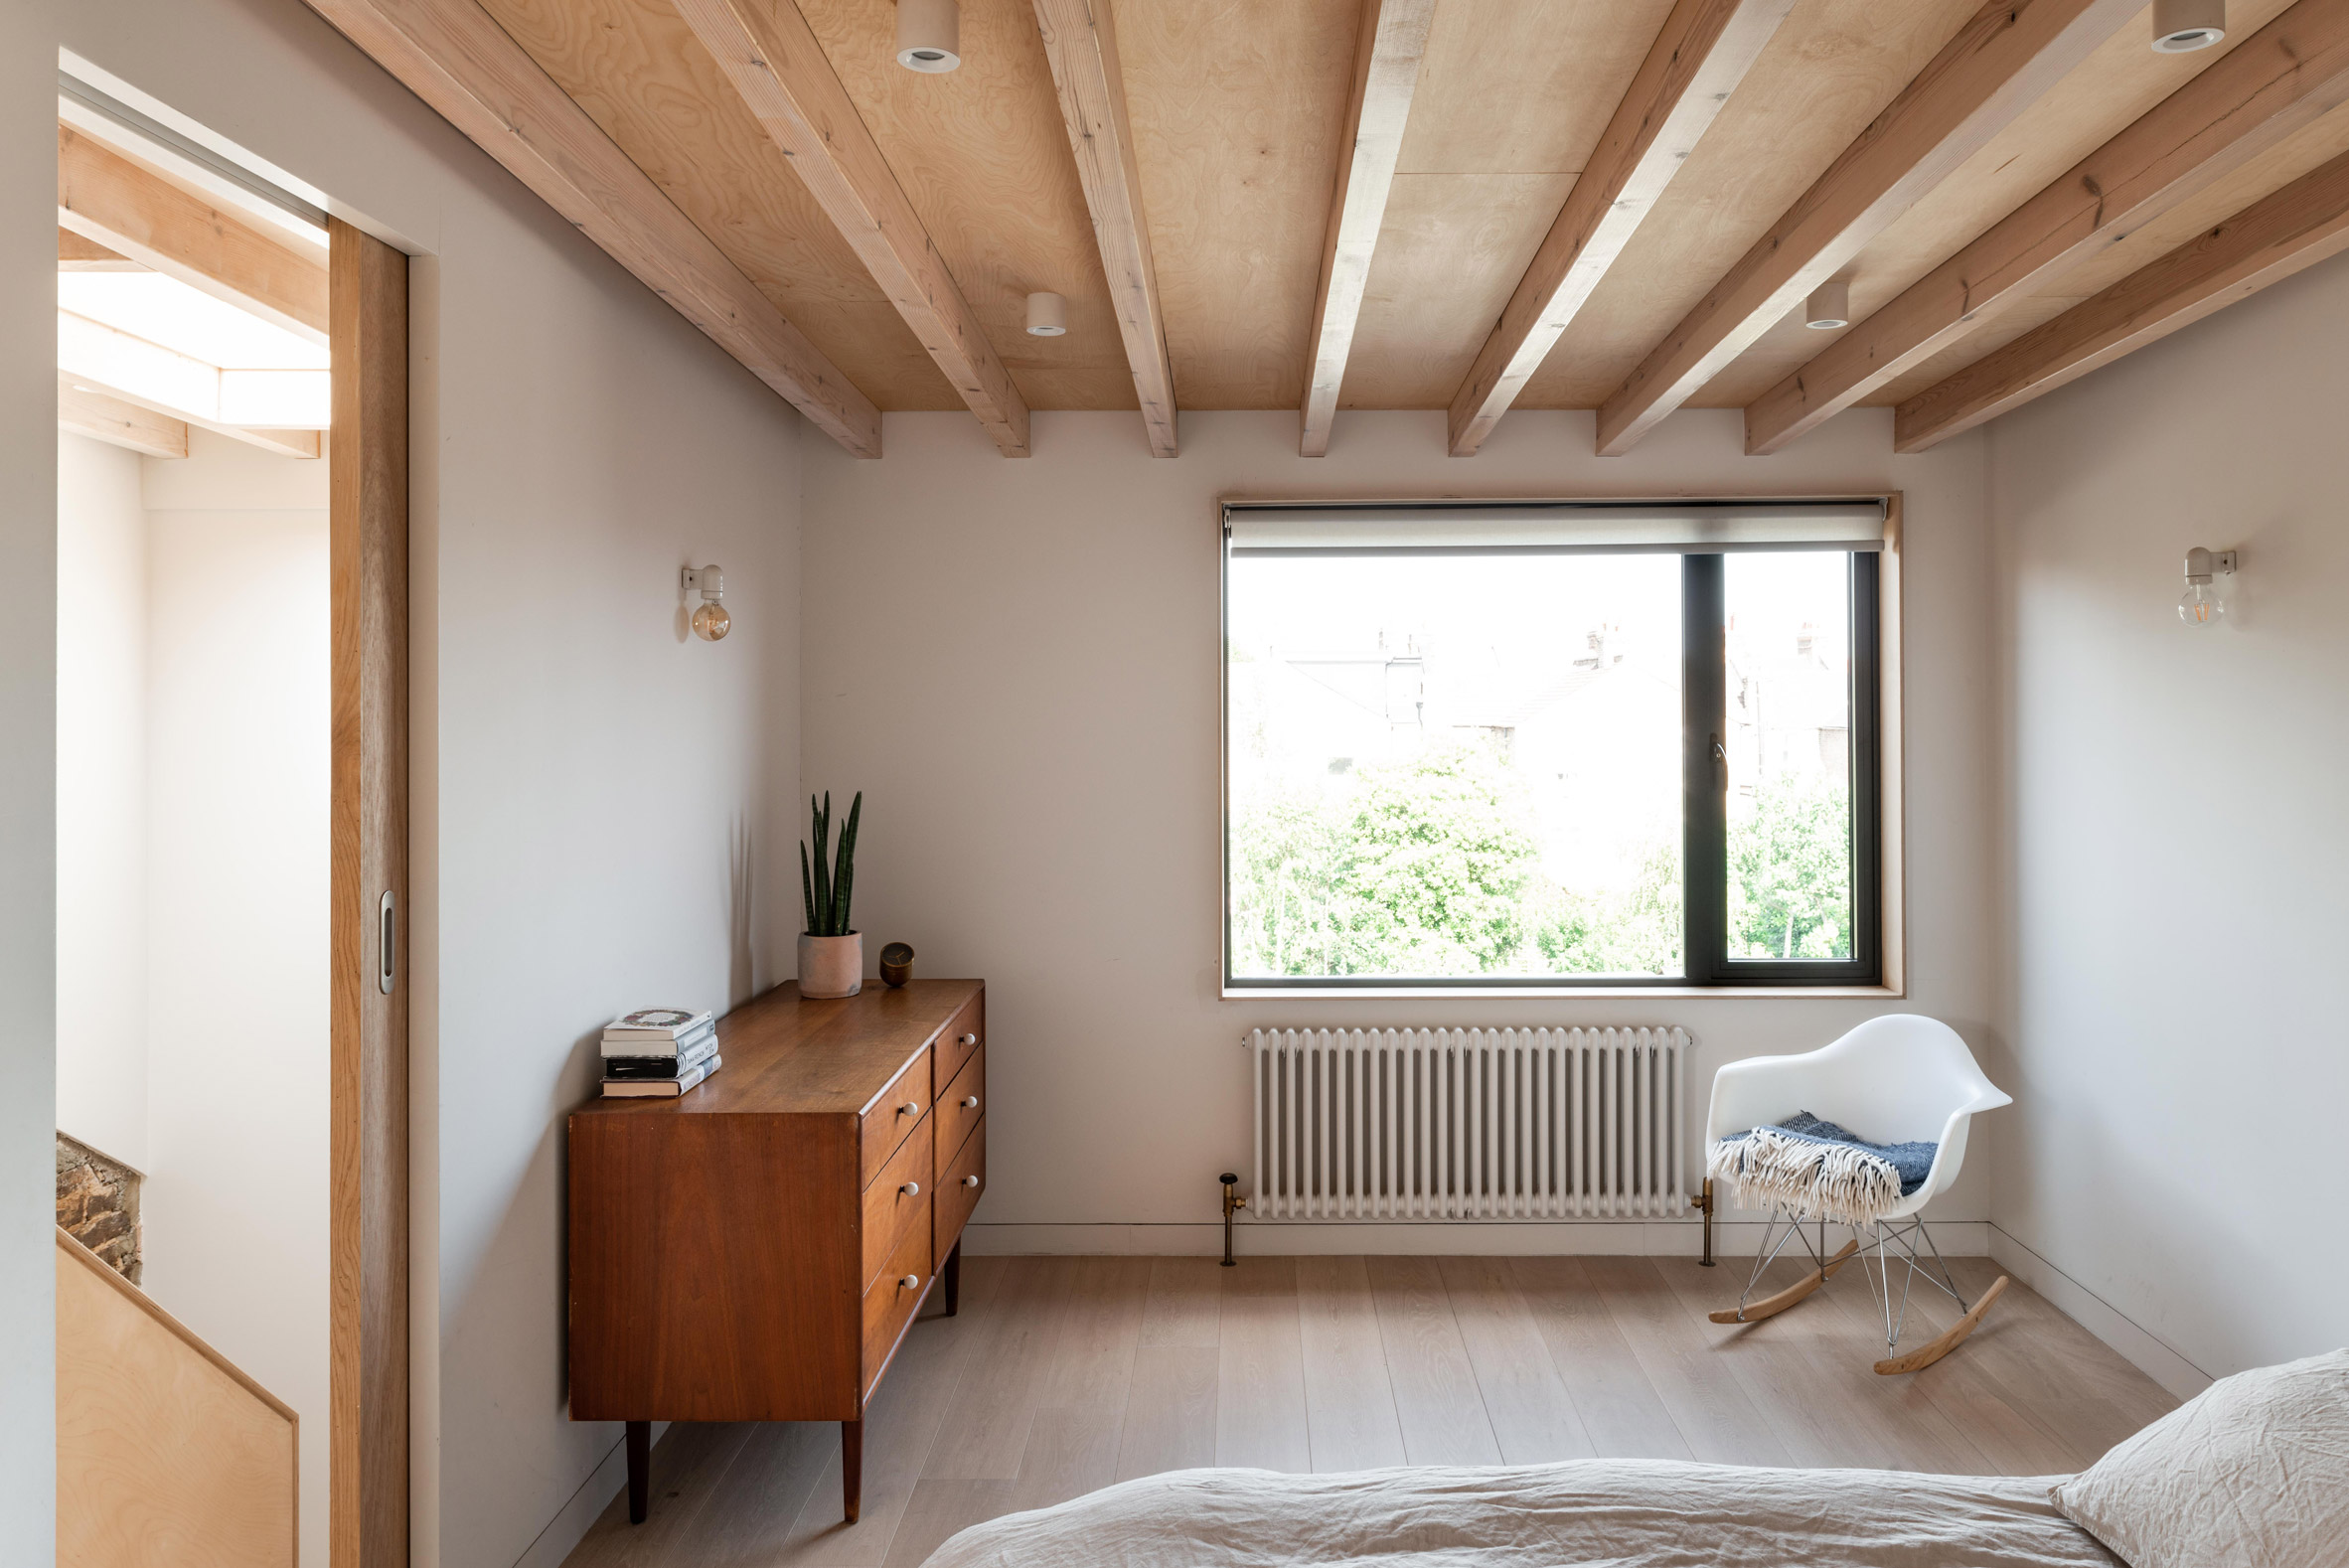 Bedroom with exposed wood ceiling